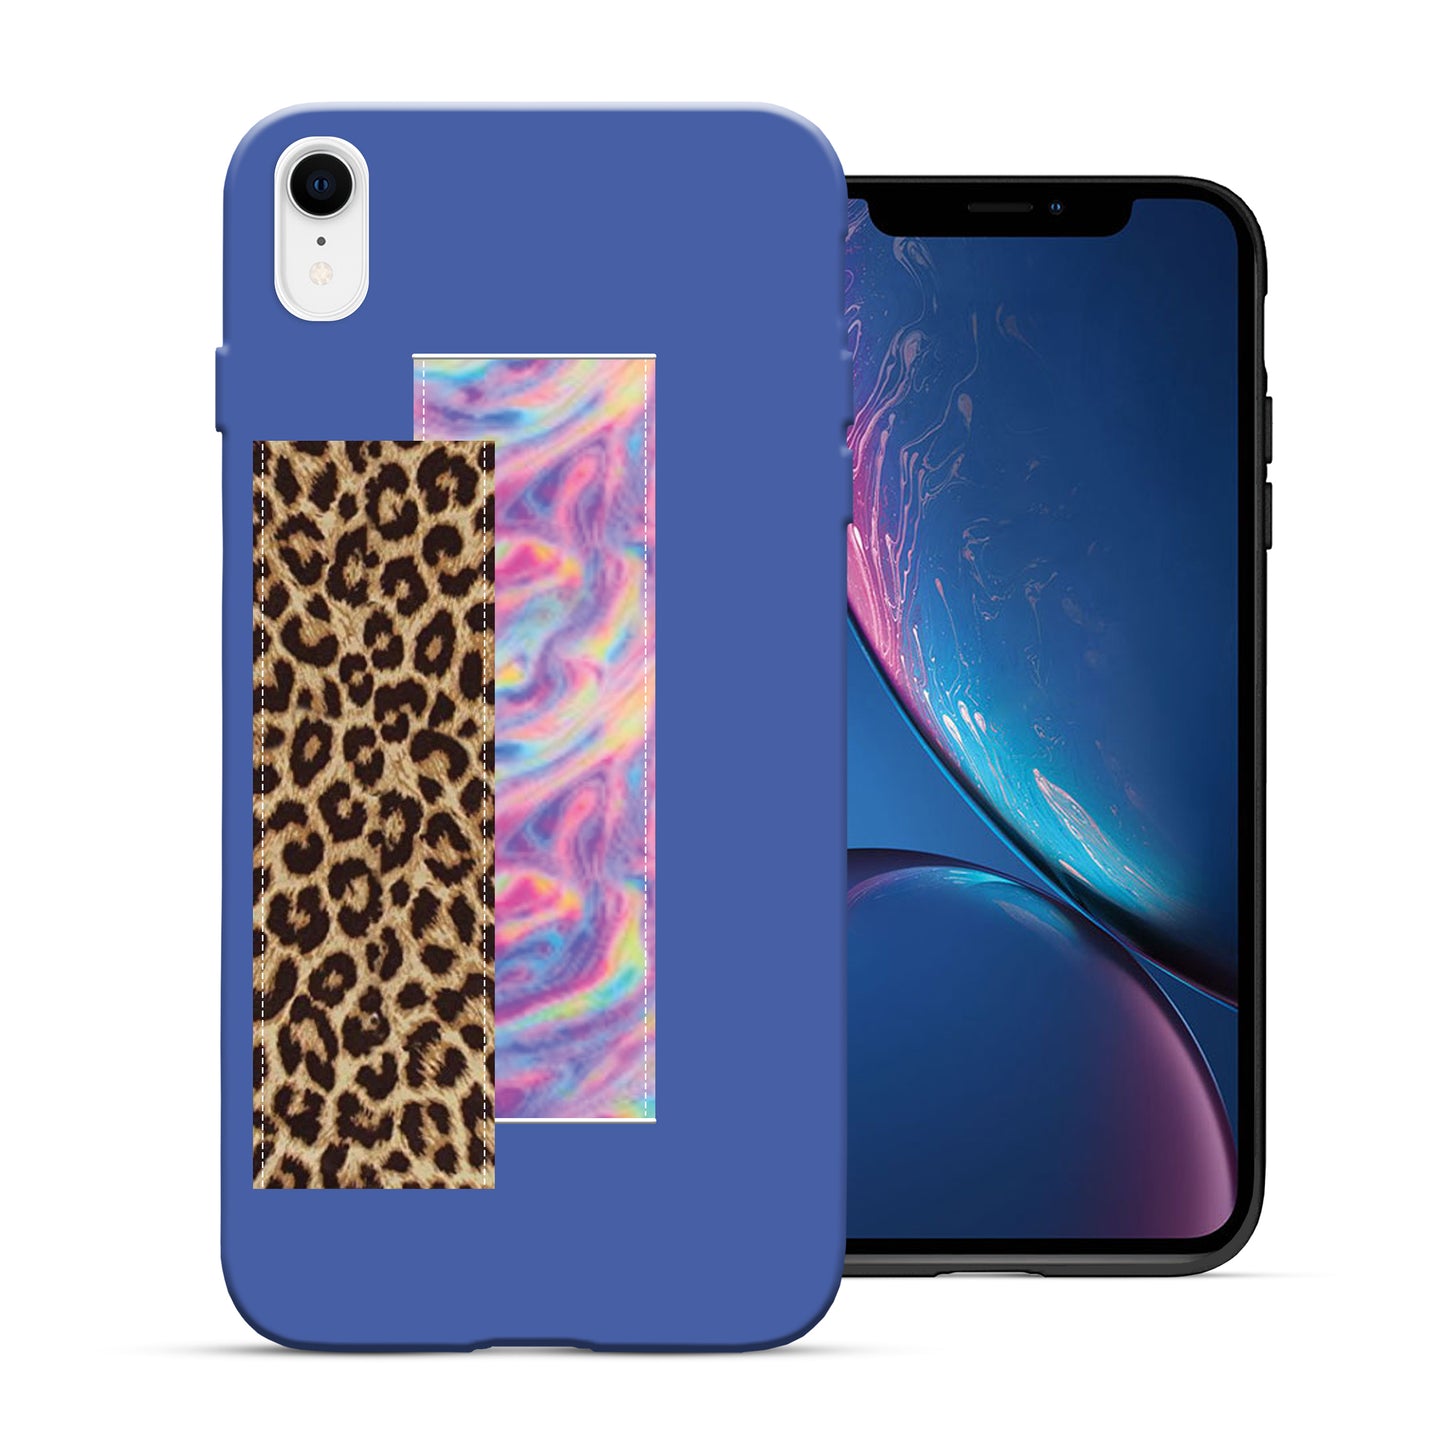 Finger Loop Phone Case For iPhone XR Blue With Black & Grey Strap